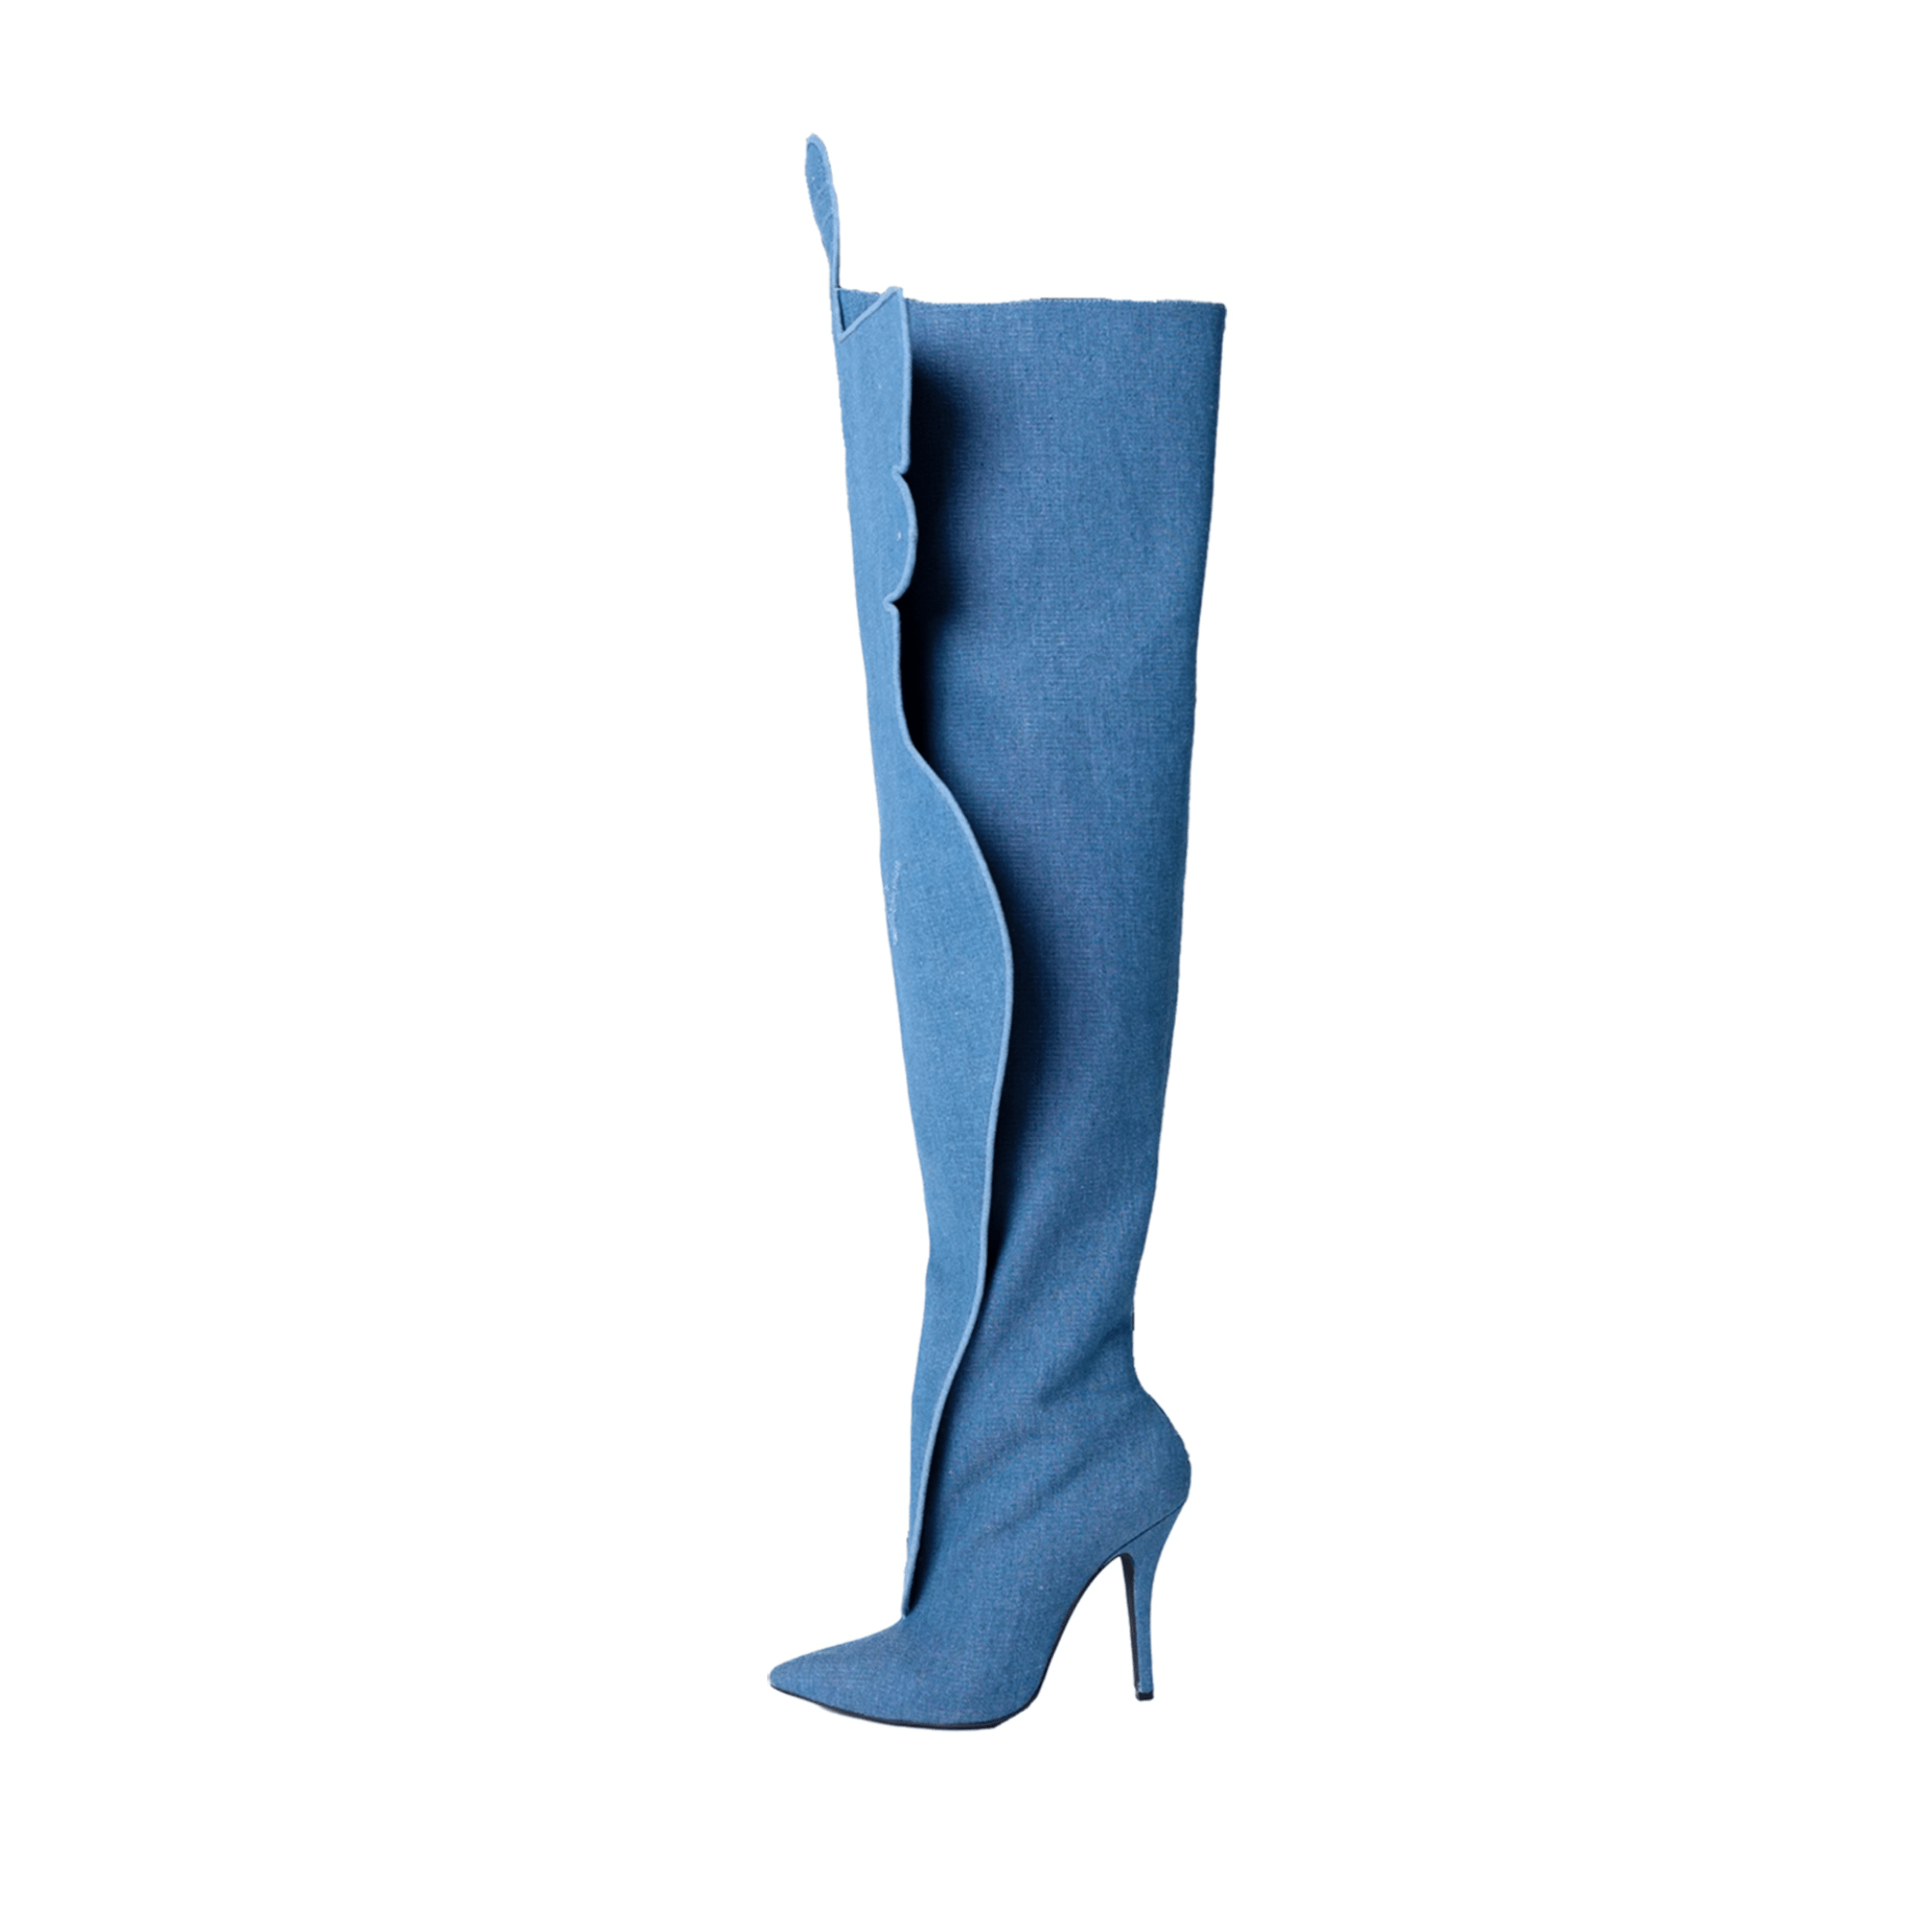 Winged Back-Zip High Boots - Kelly Obi New York